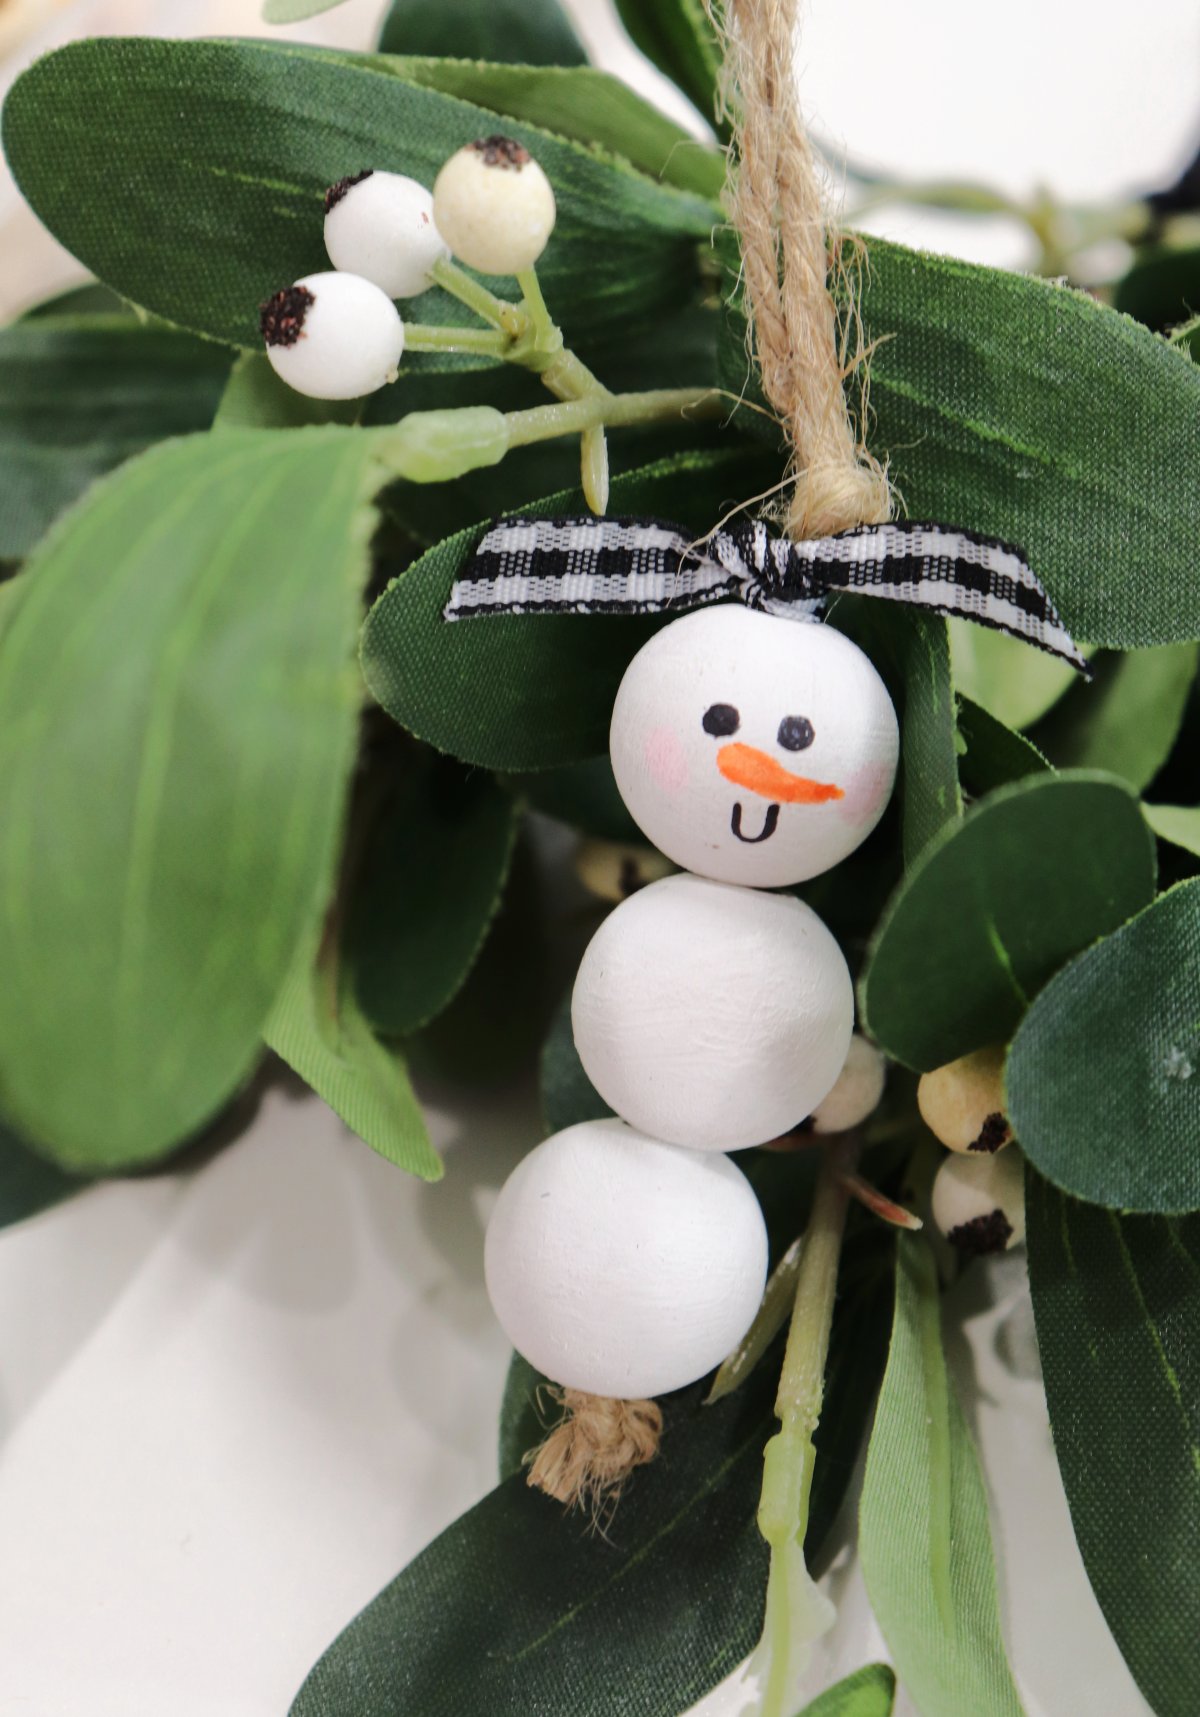 This image contains a white beaded snowman ornament with a ribbon tie and mistletoe.